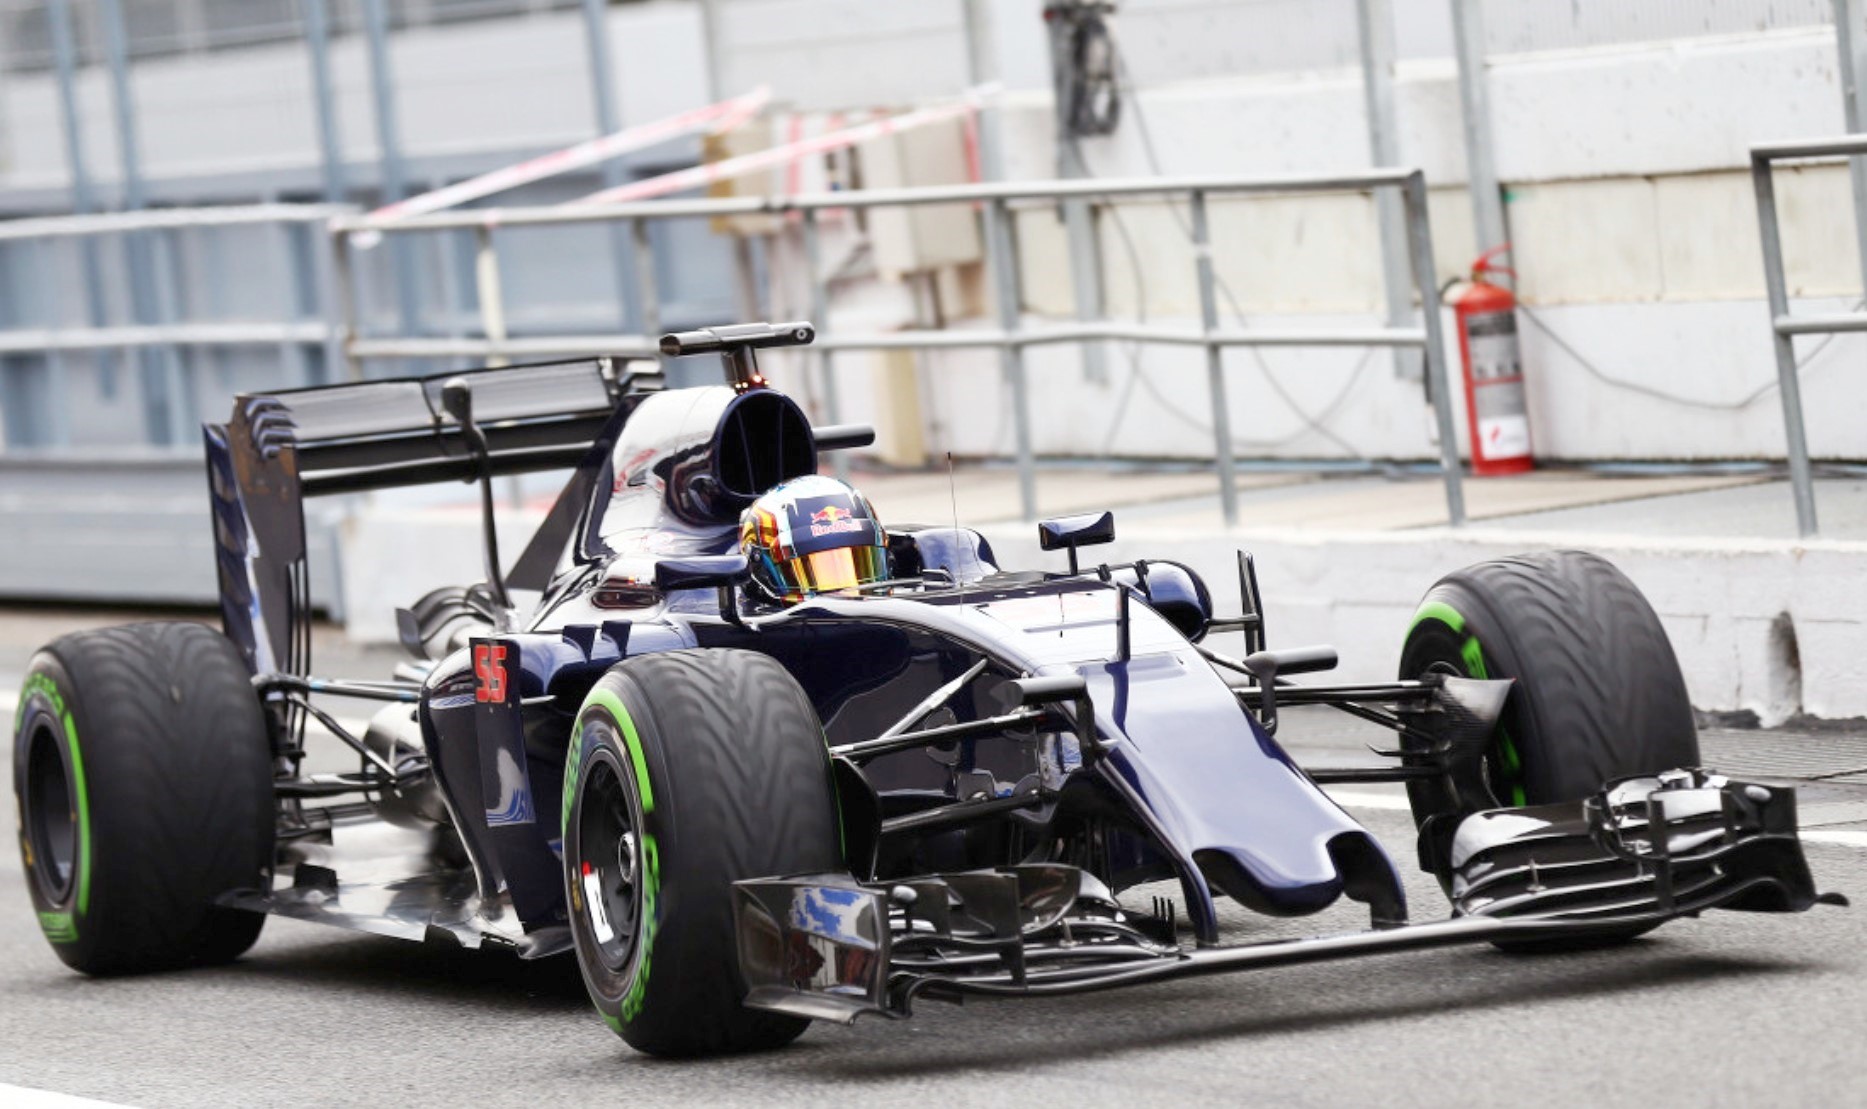 The new Toro Rosso, as yet unpainted